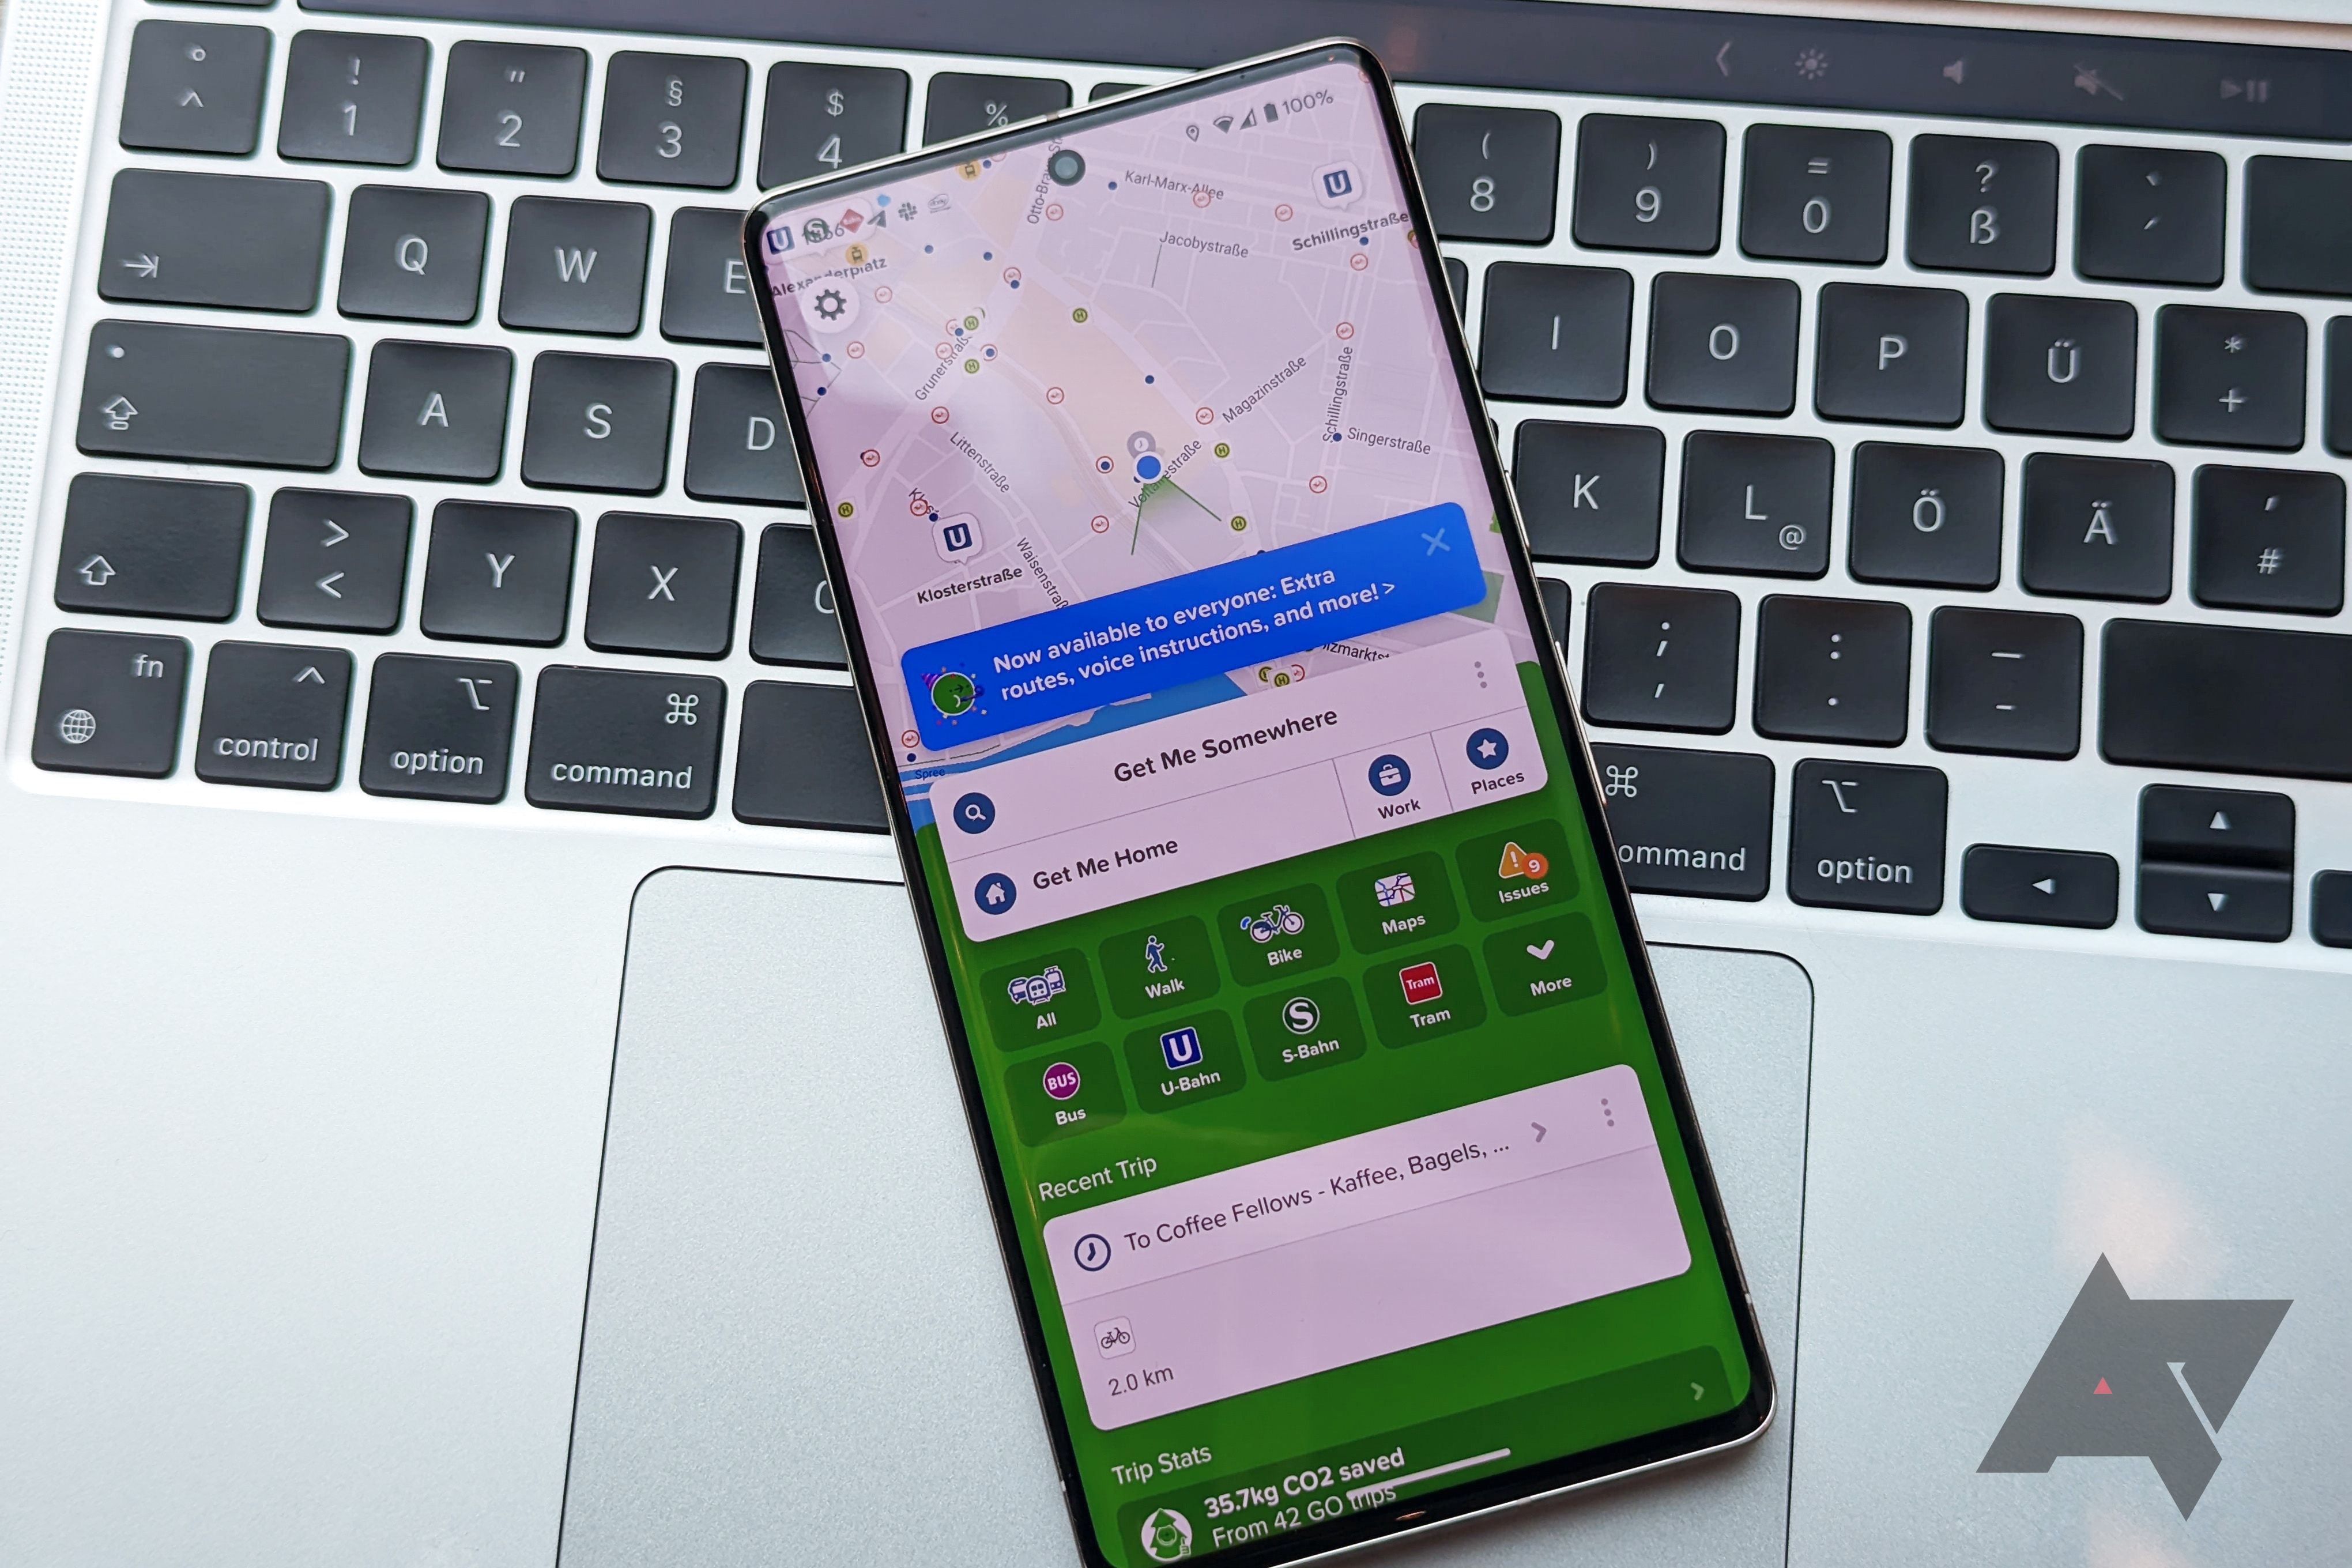 A Google Pixel 7 Pro on the keyboard of a MacBook Pro with the Citymapper app's home screen opened